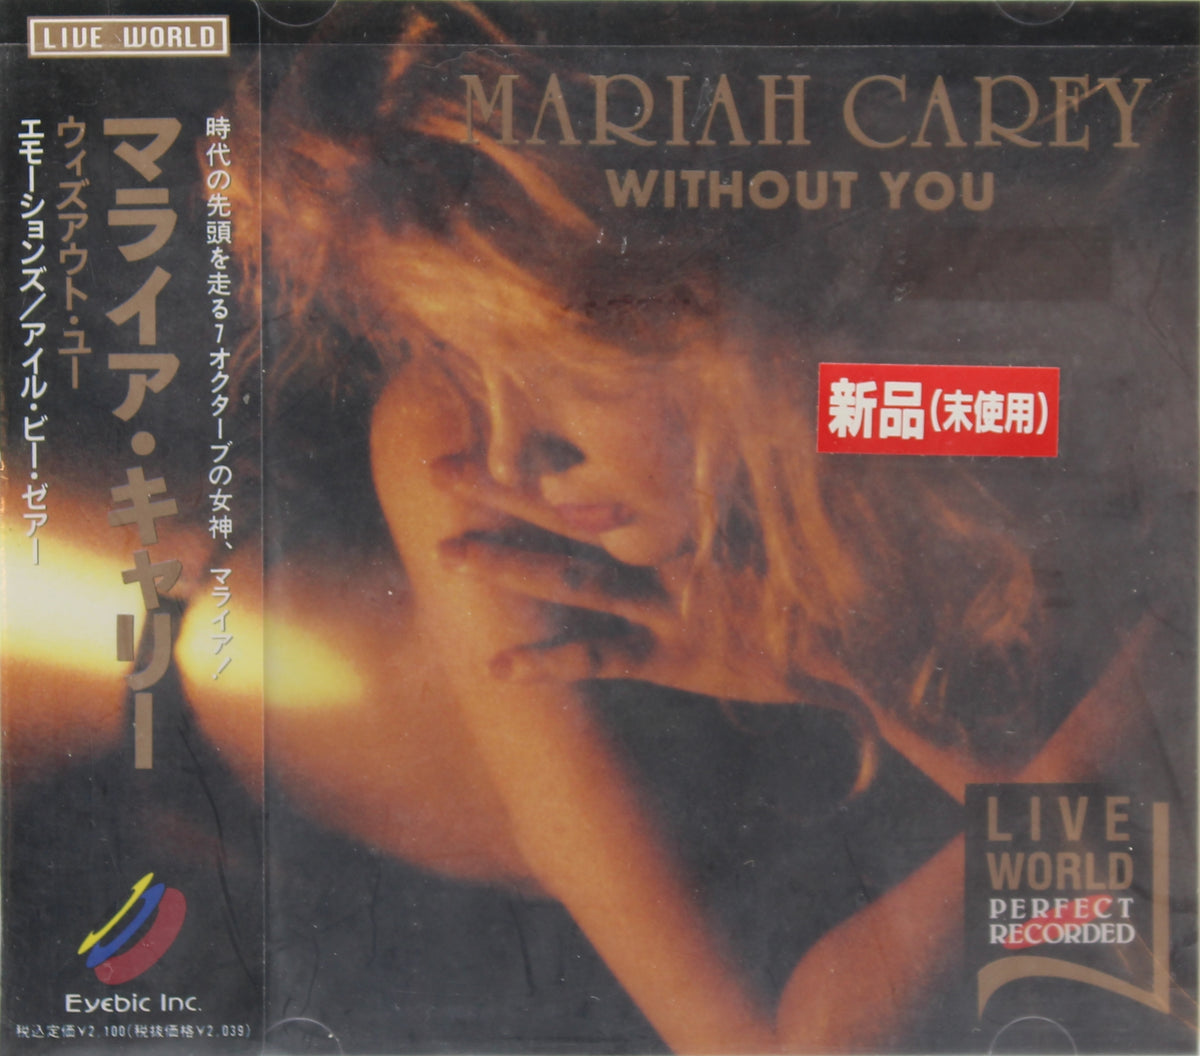 Mariah Carey, Without You, CD Bootleg Unofficial Release, Japan 1994 (CD 676)